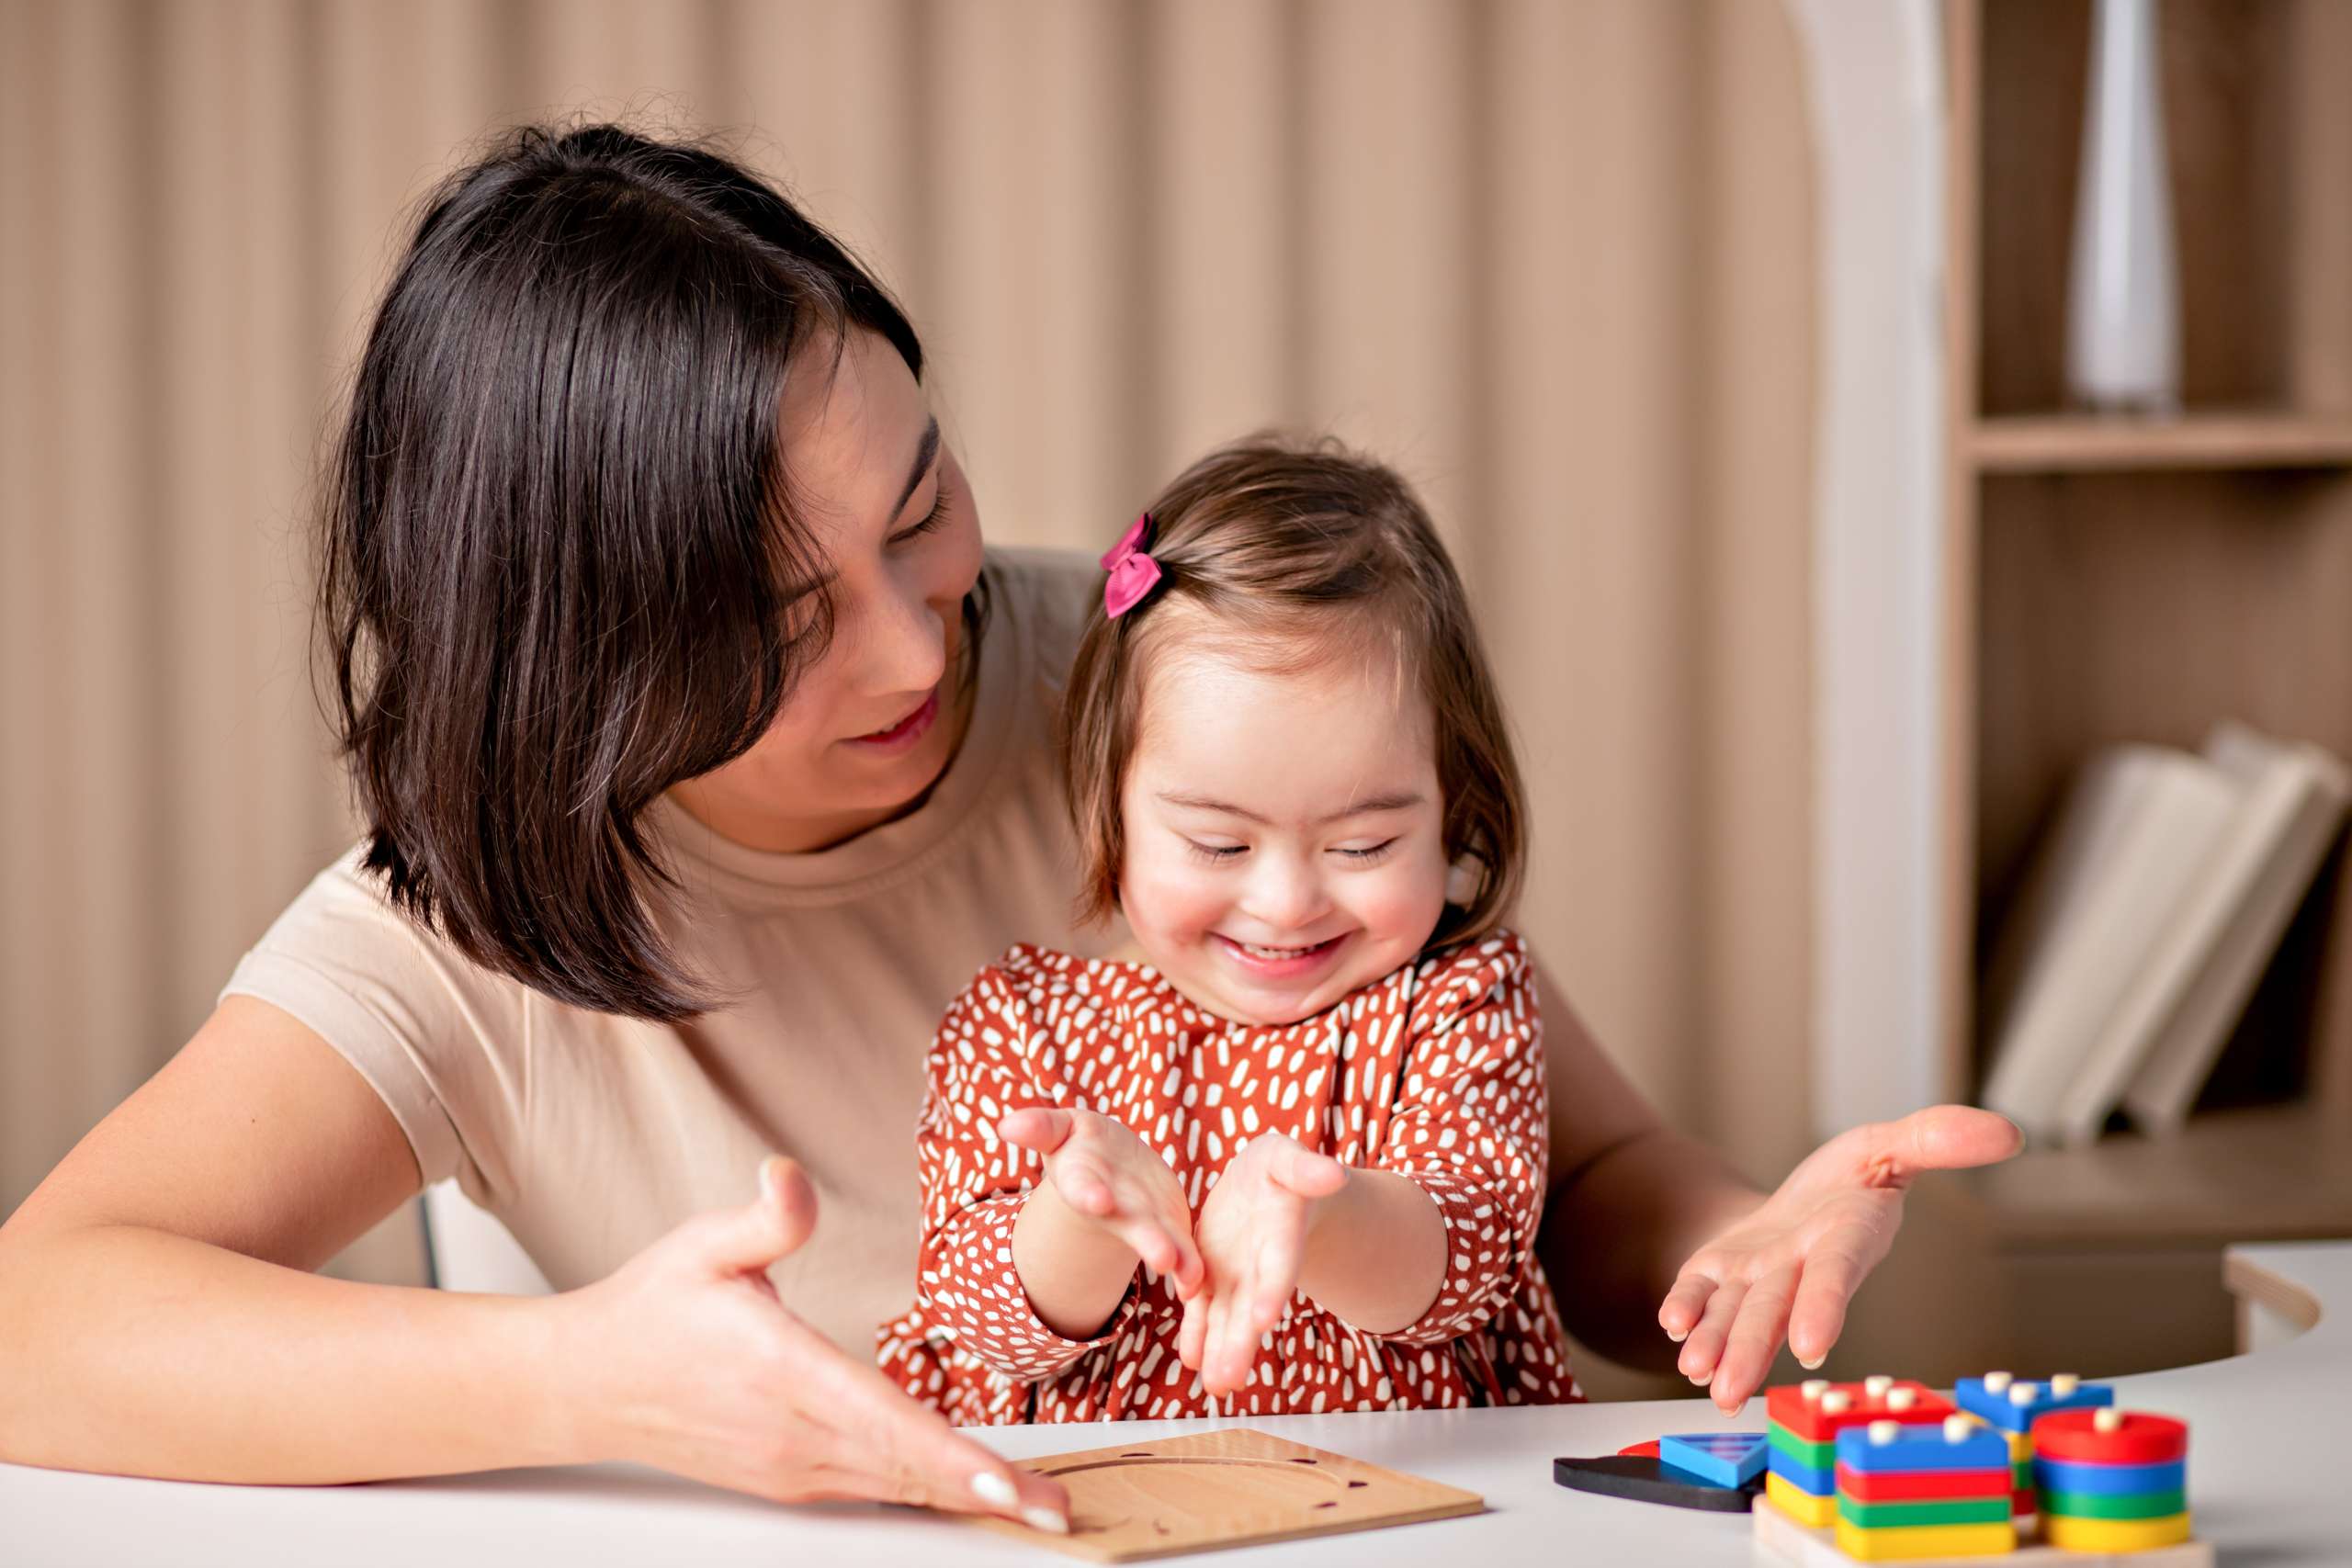 child with down syndrome with educational toys smiles, a cute girl with her mother a teacher-Down Syndrome On Expectant Mothers